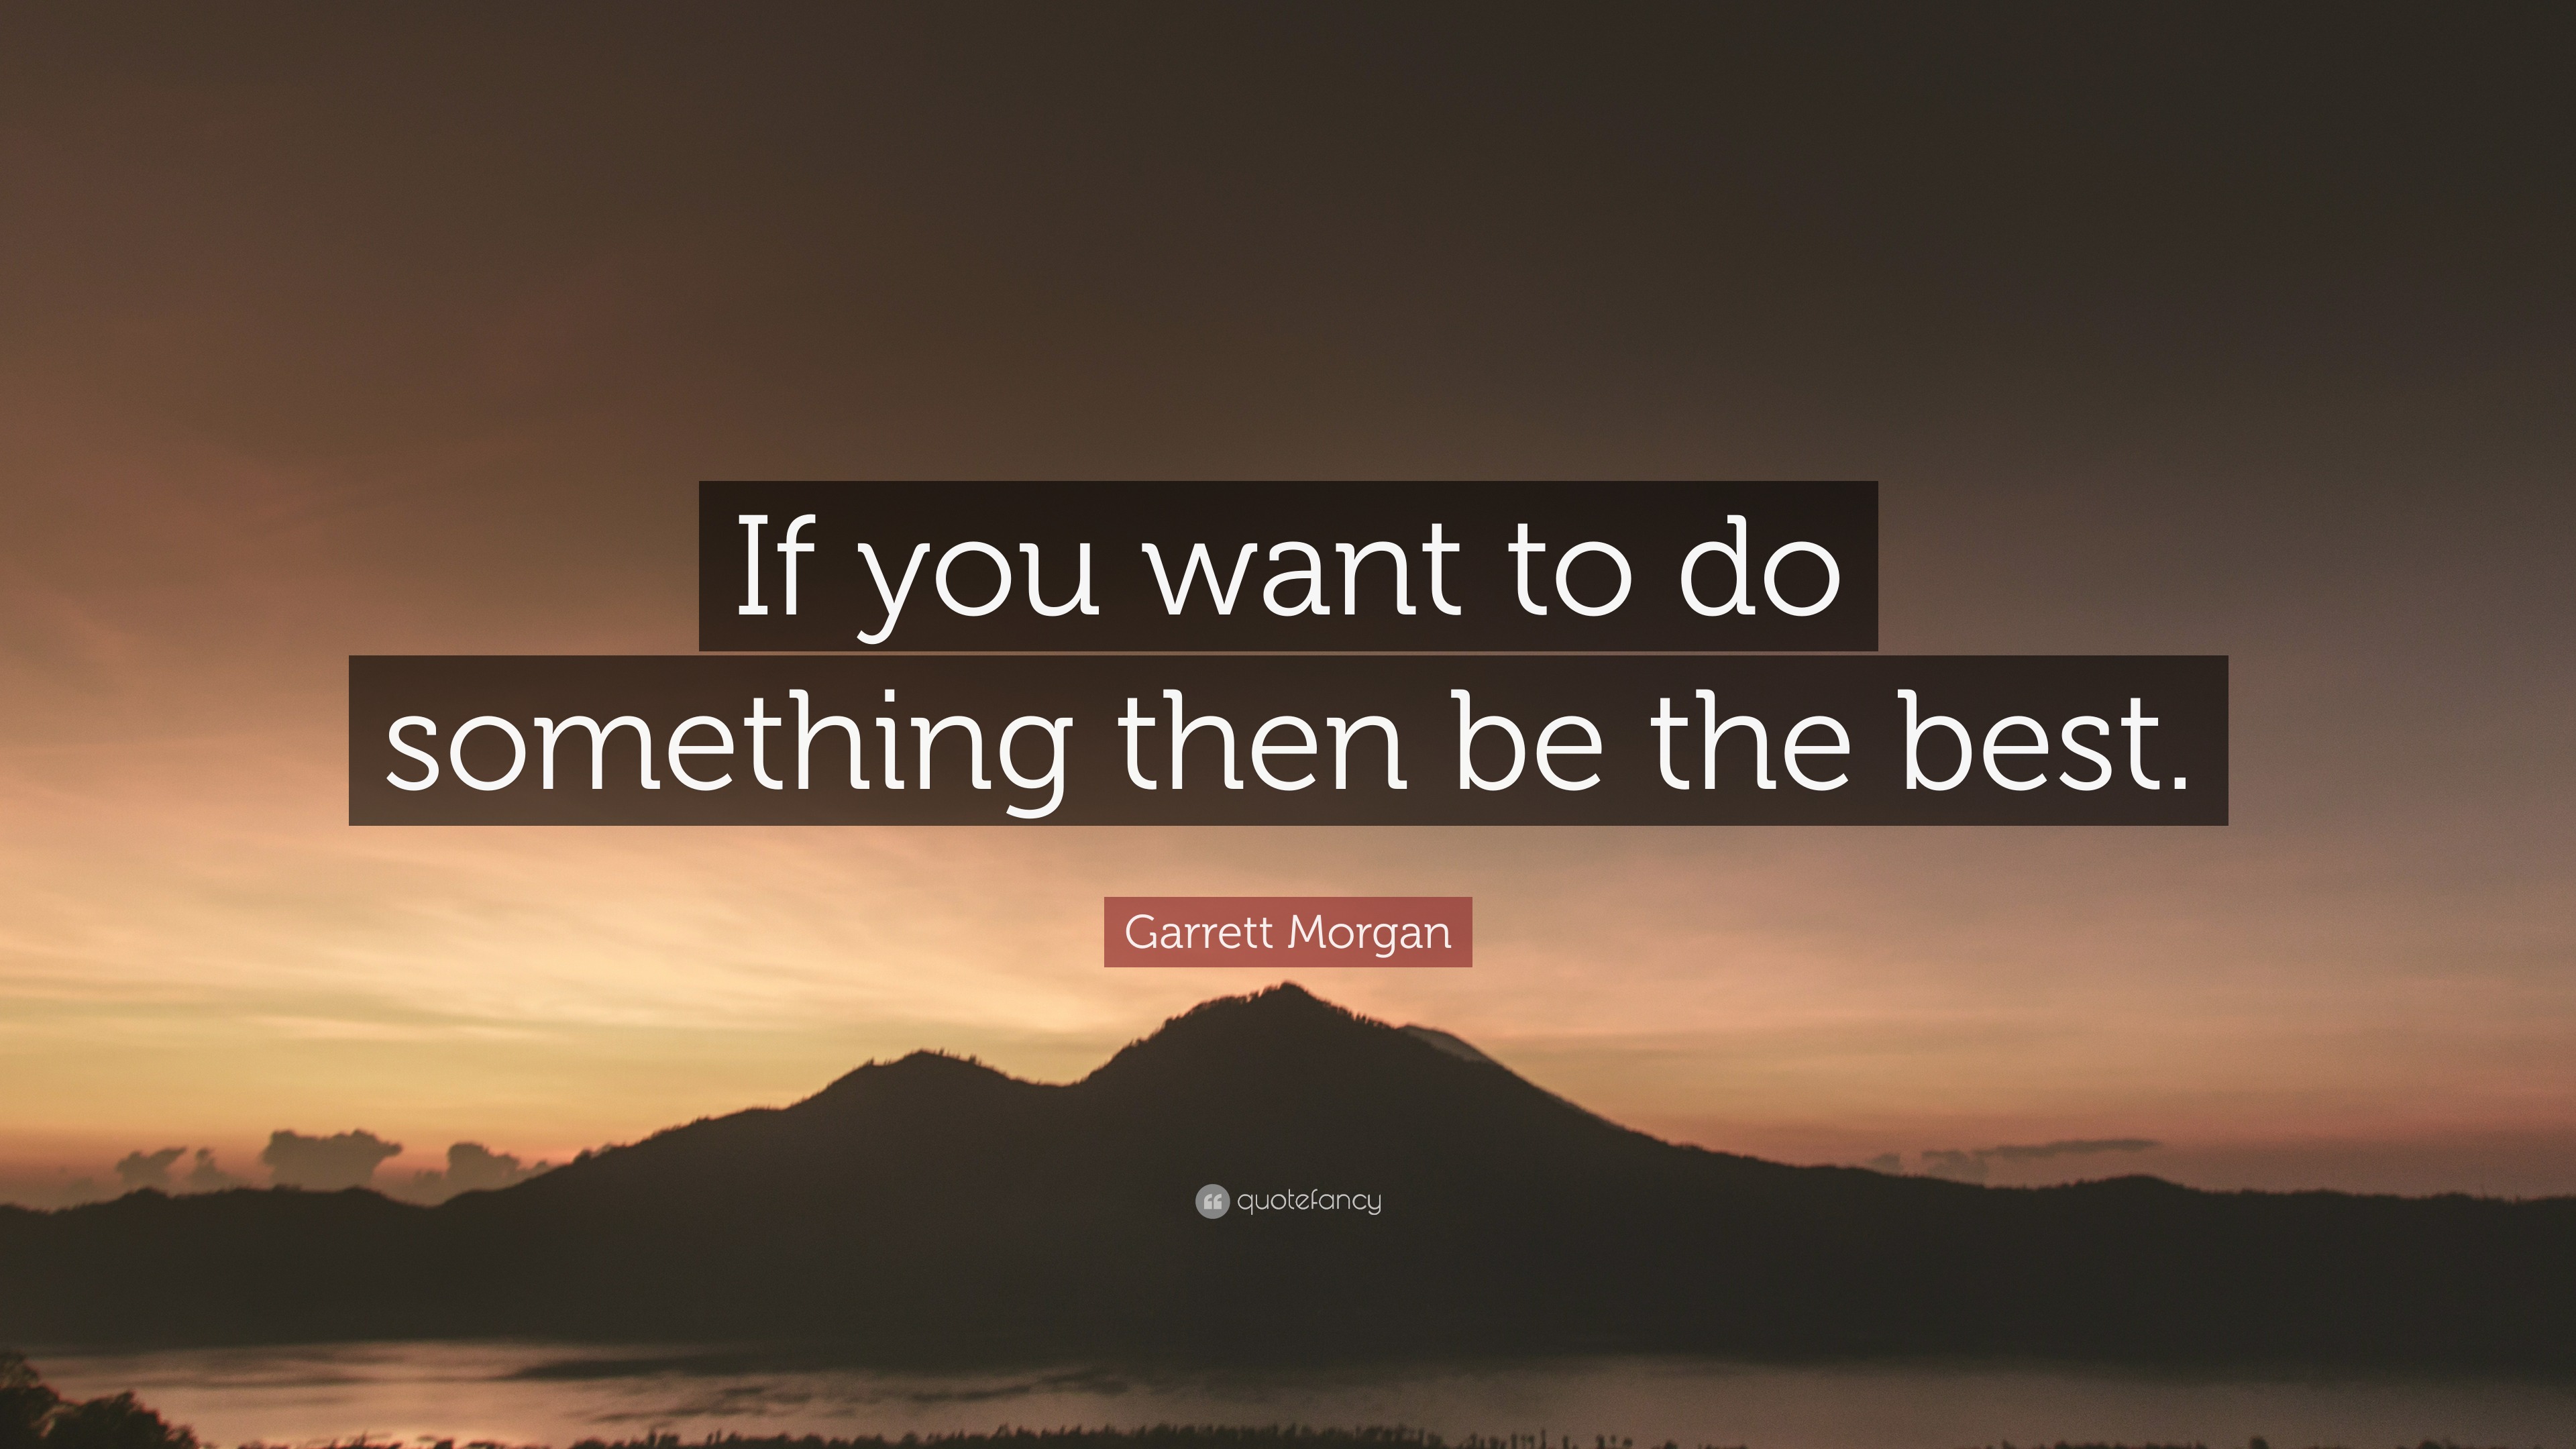 Garrett Morgan Quote: “If you want to do something then be the best.”